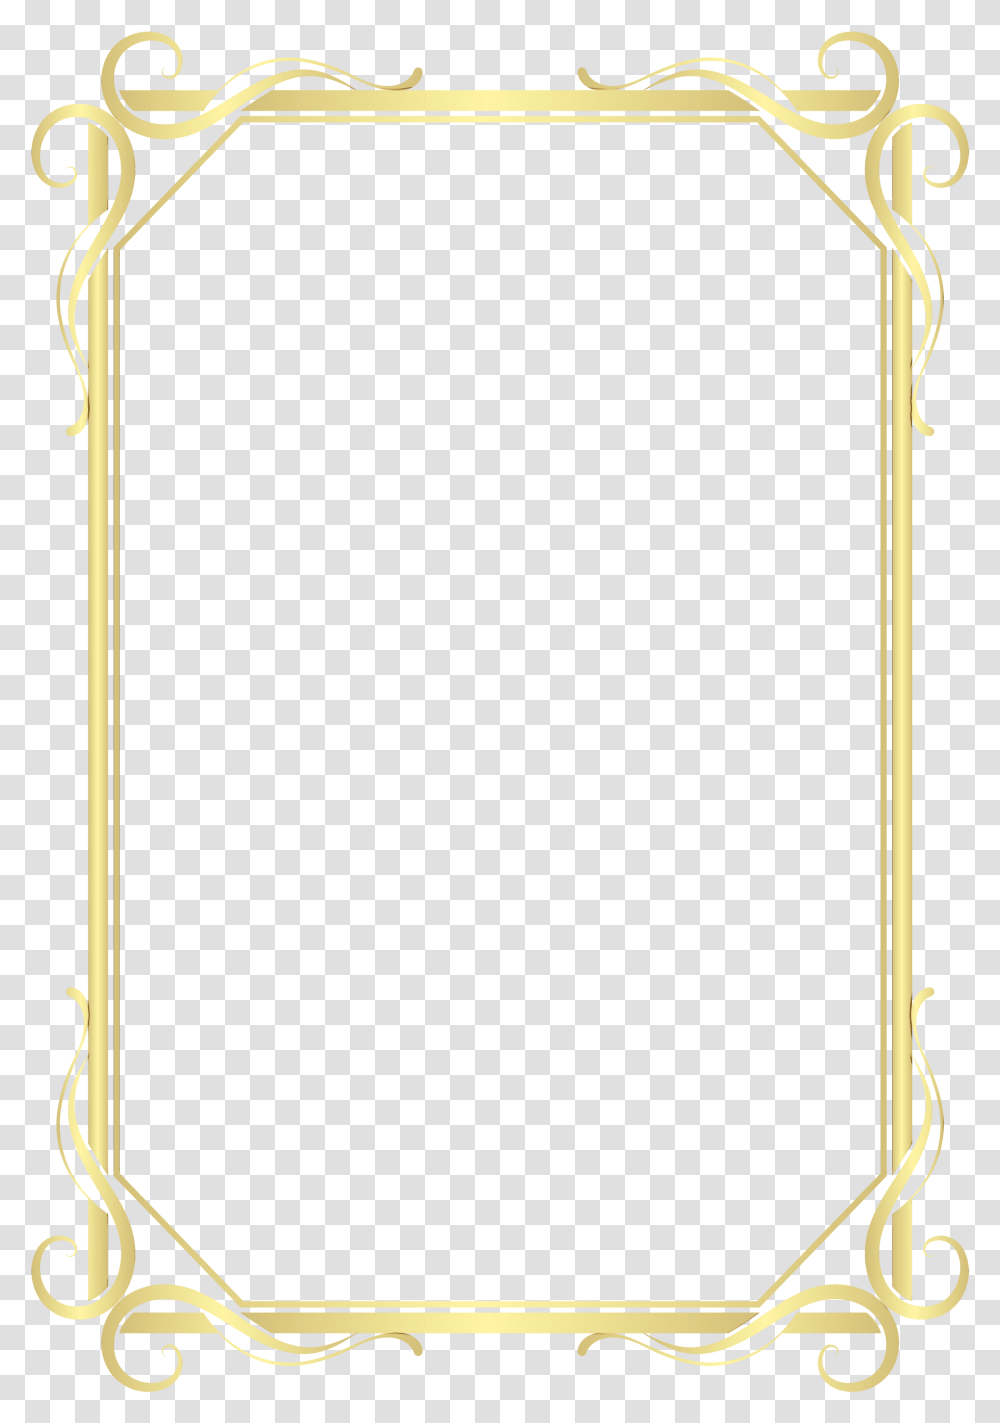 Portable Network Graphics Transparency Clip Art Vector Border Frame, Bow, Sweets, Food, Scroll Transparent Png